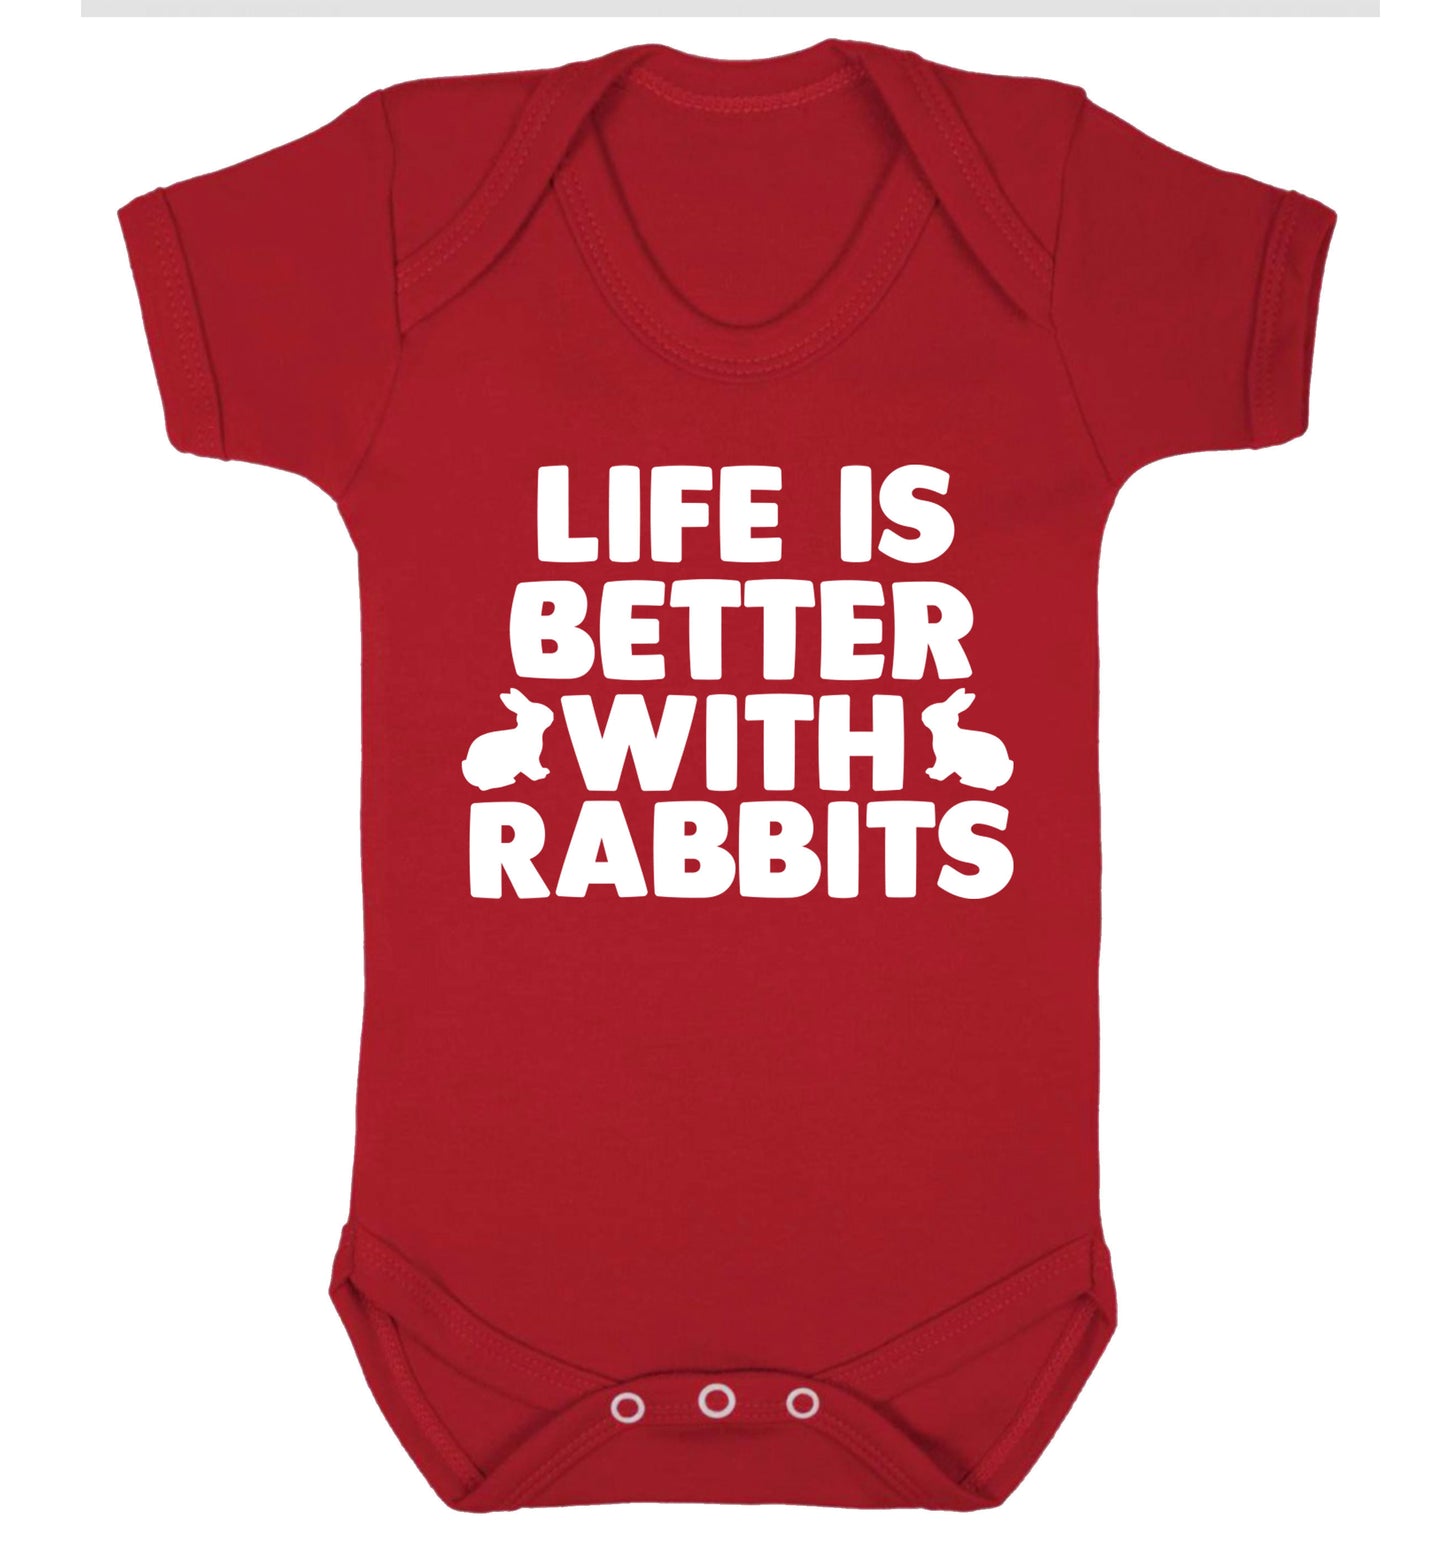 Life is better with rabbits Baby Vest red 18-24 months